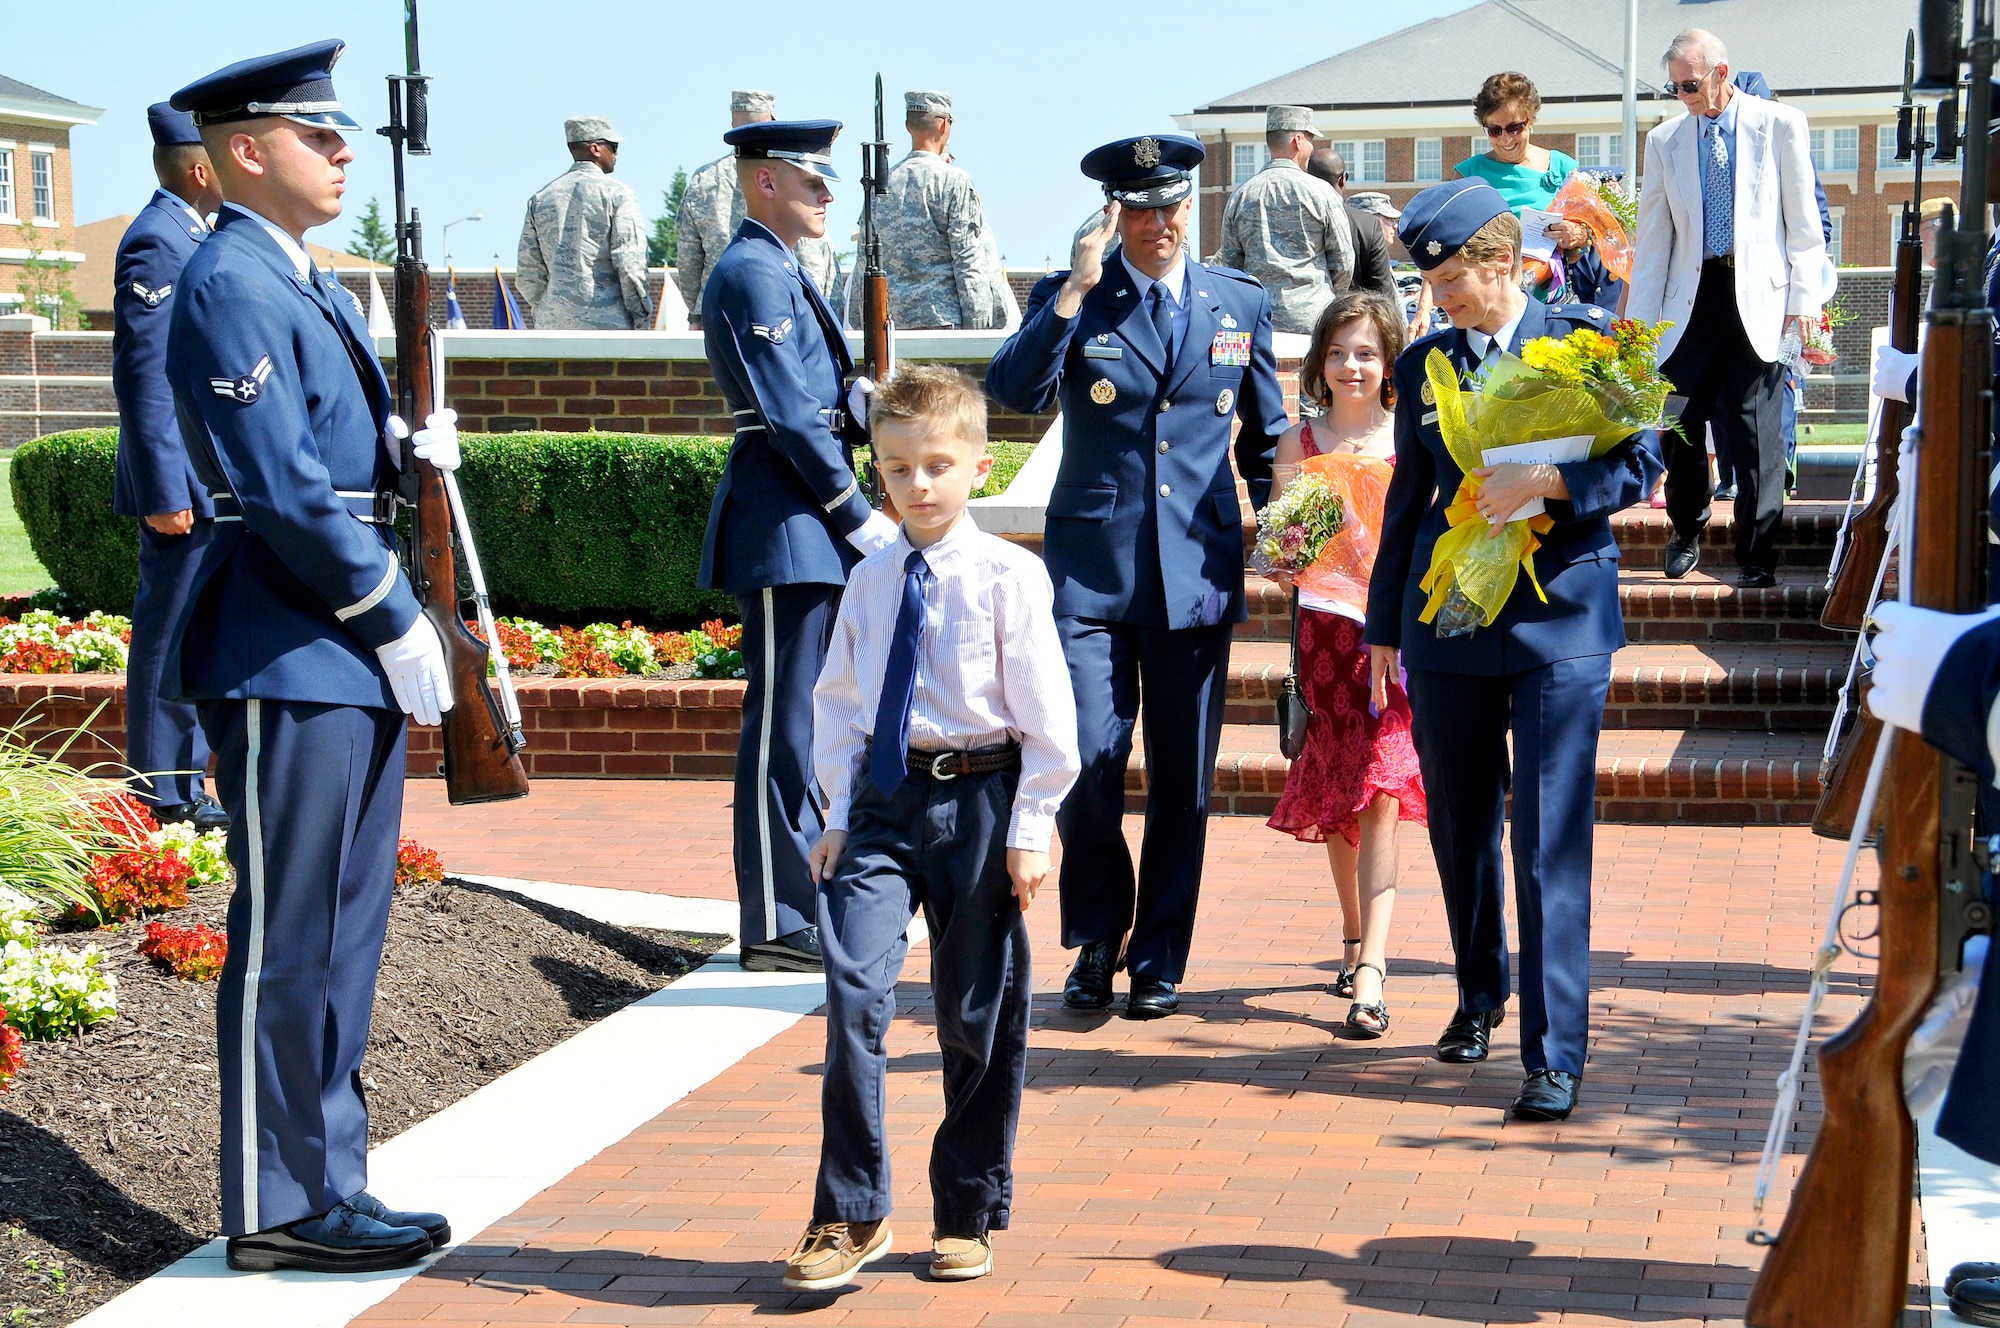 Lt. Col. Kenneth A. Marentette, U.S. Air Force Honor Guard commander and his family depart following the change of command ceremony on the ceremonial lawn, July 12, Joint Base Anacostia-Bolling, D.C. Marentette assumed command  from  Lt. Col. Raymond Powell  The ceremony was hosted by Col. Gina M. Humble, 11th Operations Group commander. (U.S. Air Force photo by Senior Airman Steele C. G. Britton)